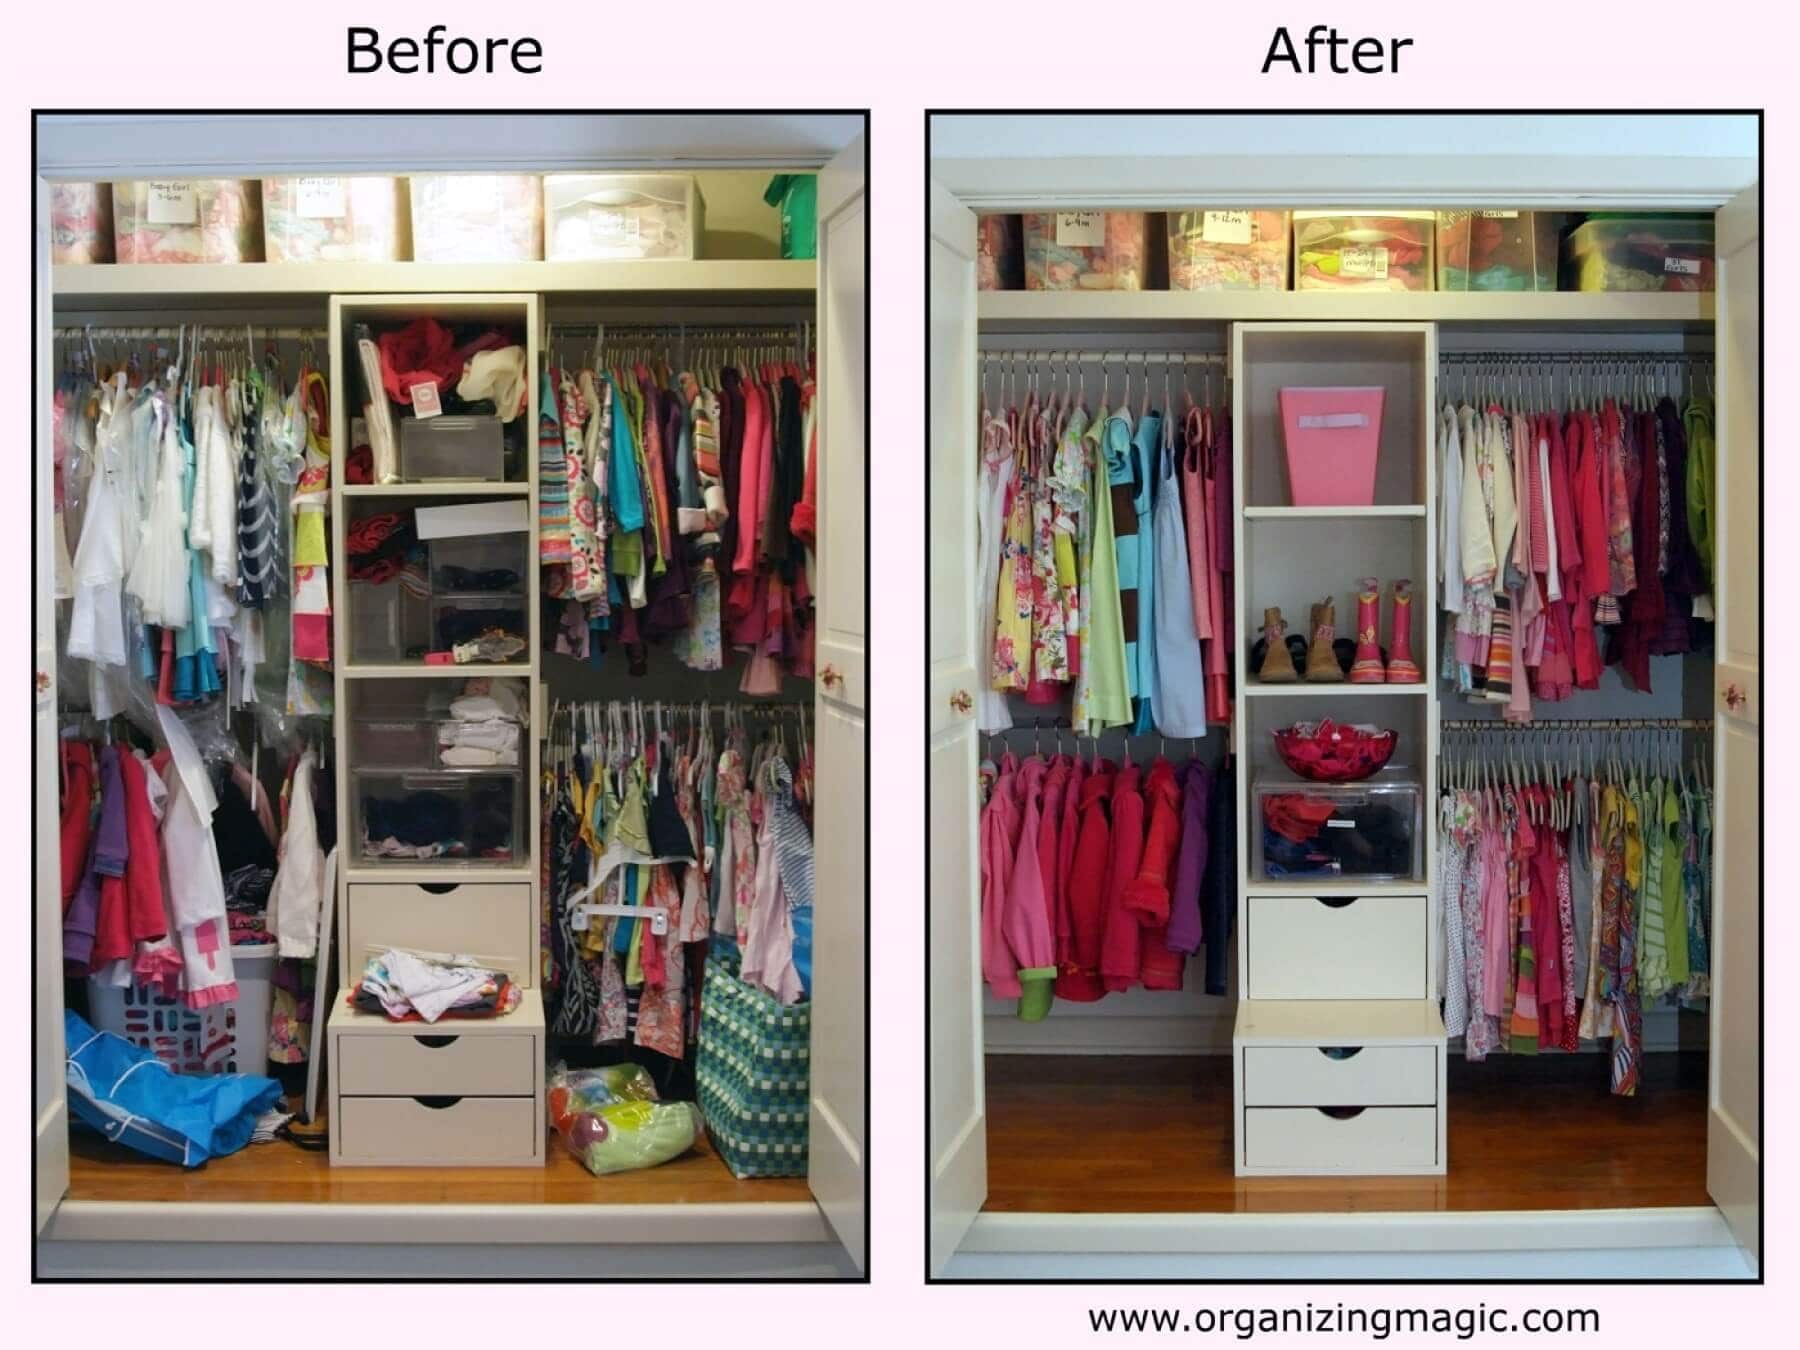 At Organizing Magic, we love working with clients on their closets.